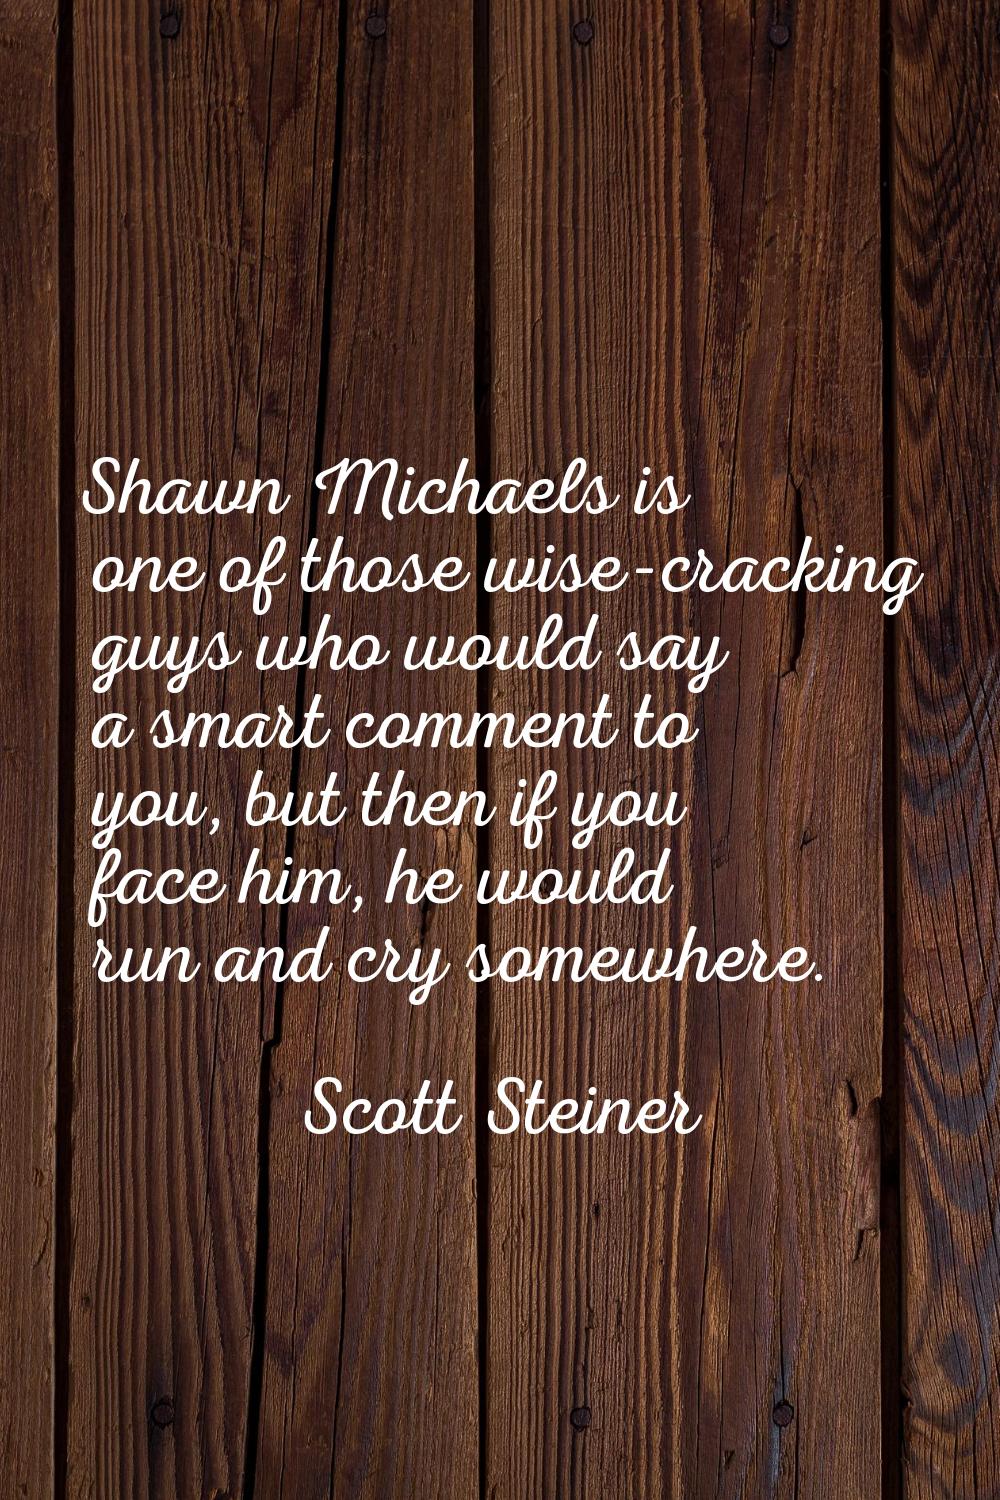 Shawn Michaels is one of those wise-cracking guys who would say a smart comment to you, but then if